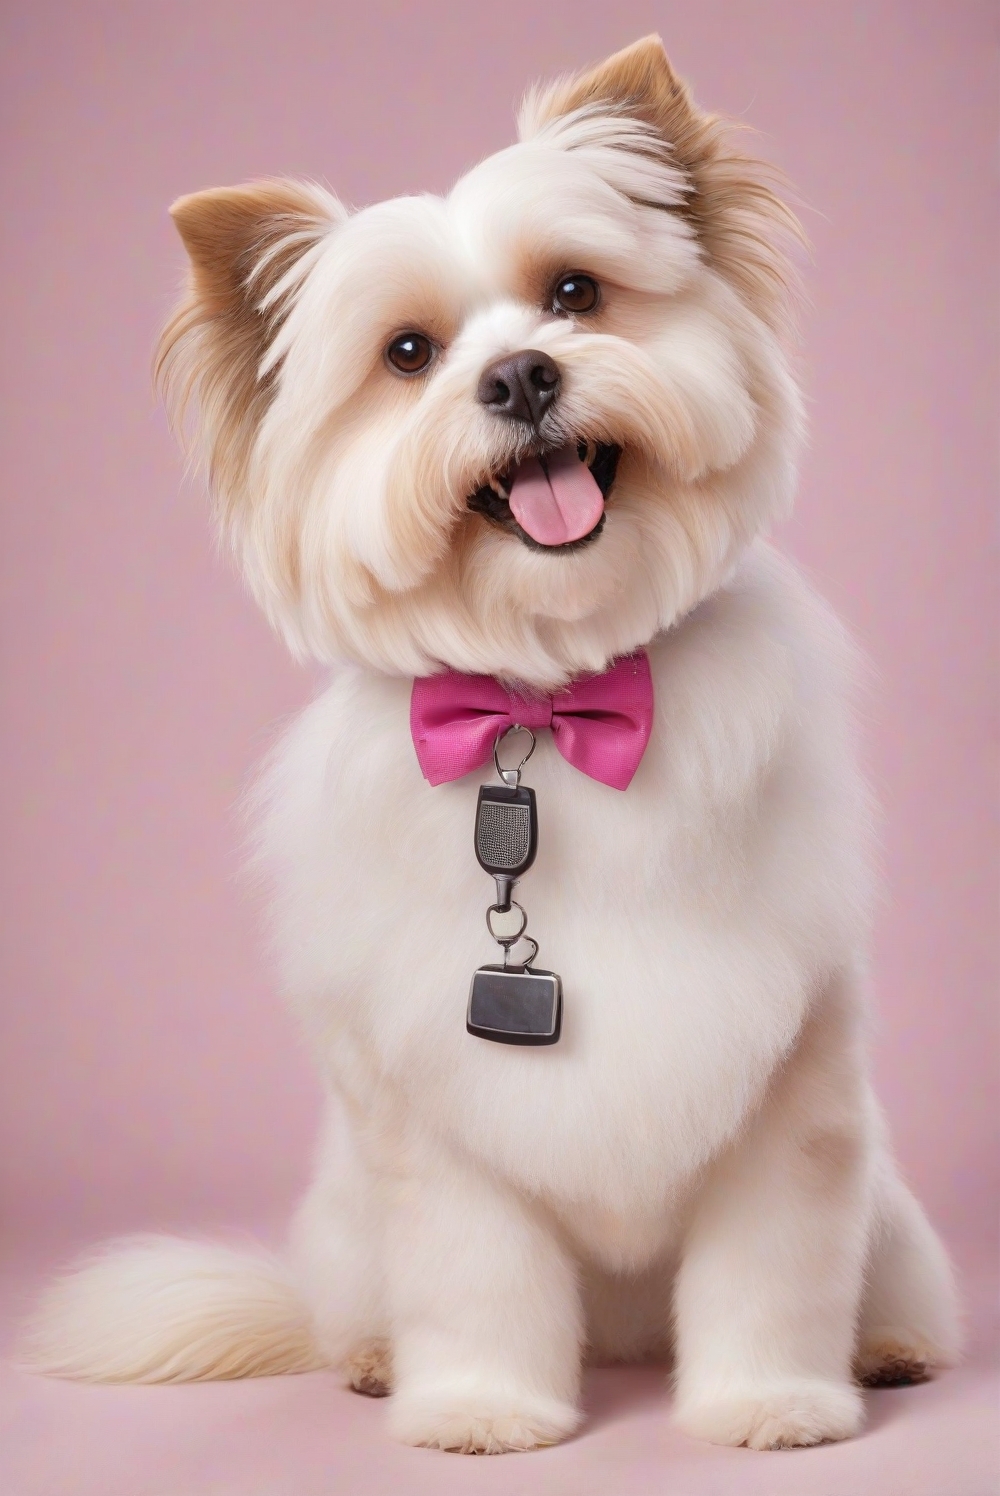 pet grooming services,pampering pets,dog grooming tips,cat grooming tools,pet haircuts,pet salon,professional grooming services